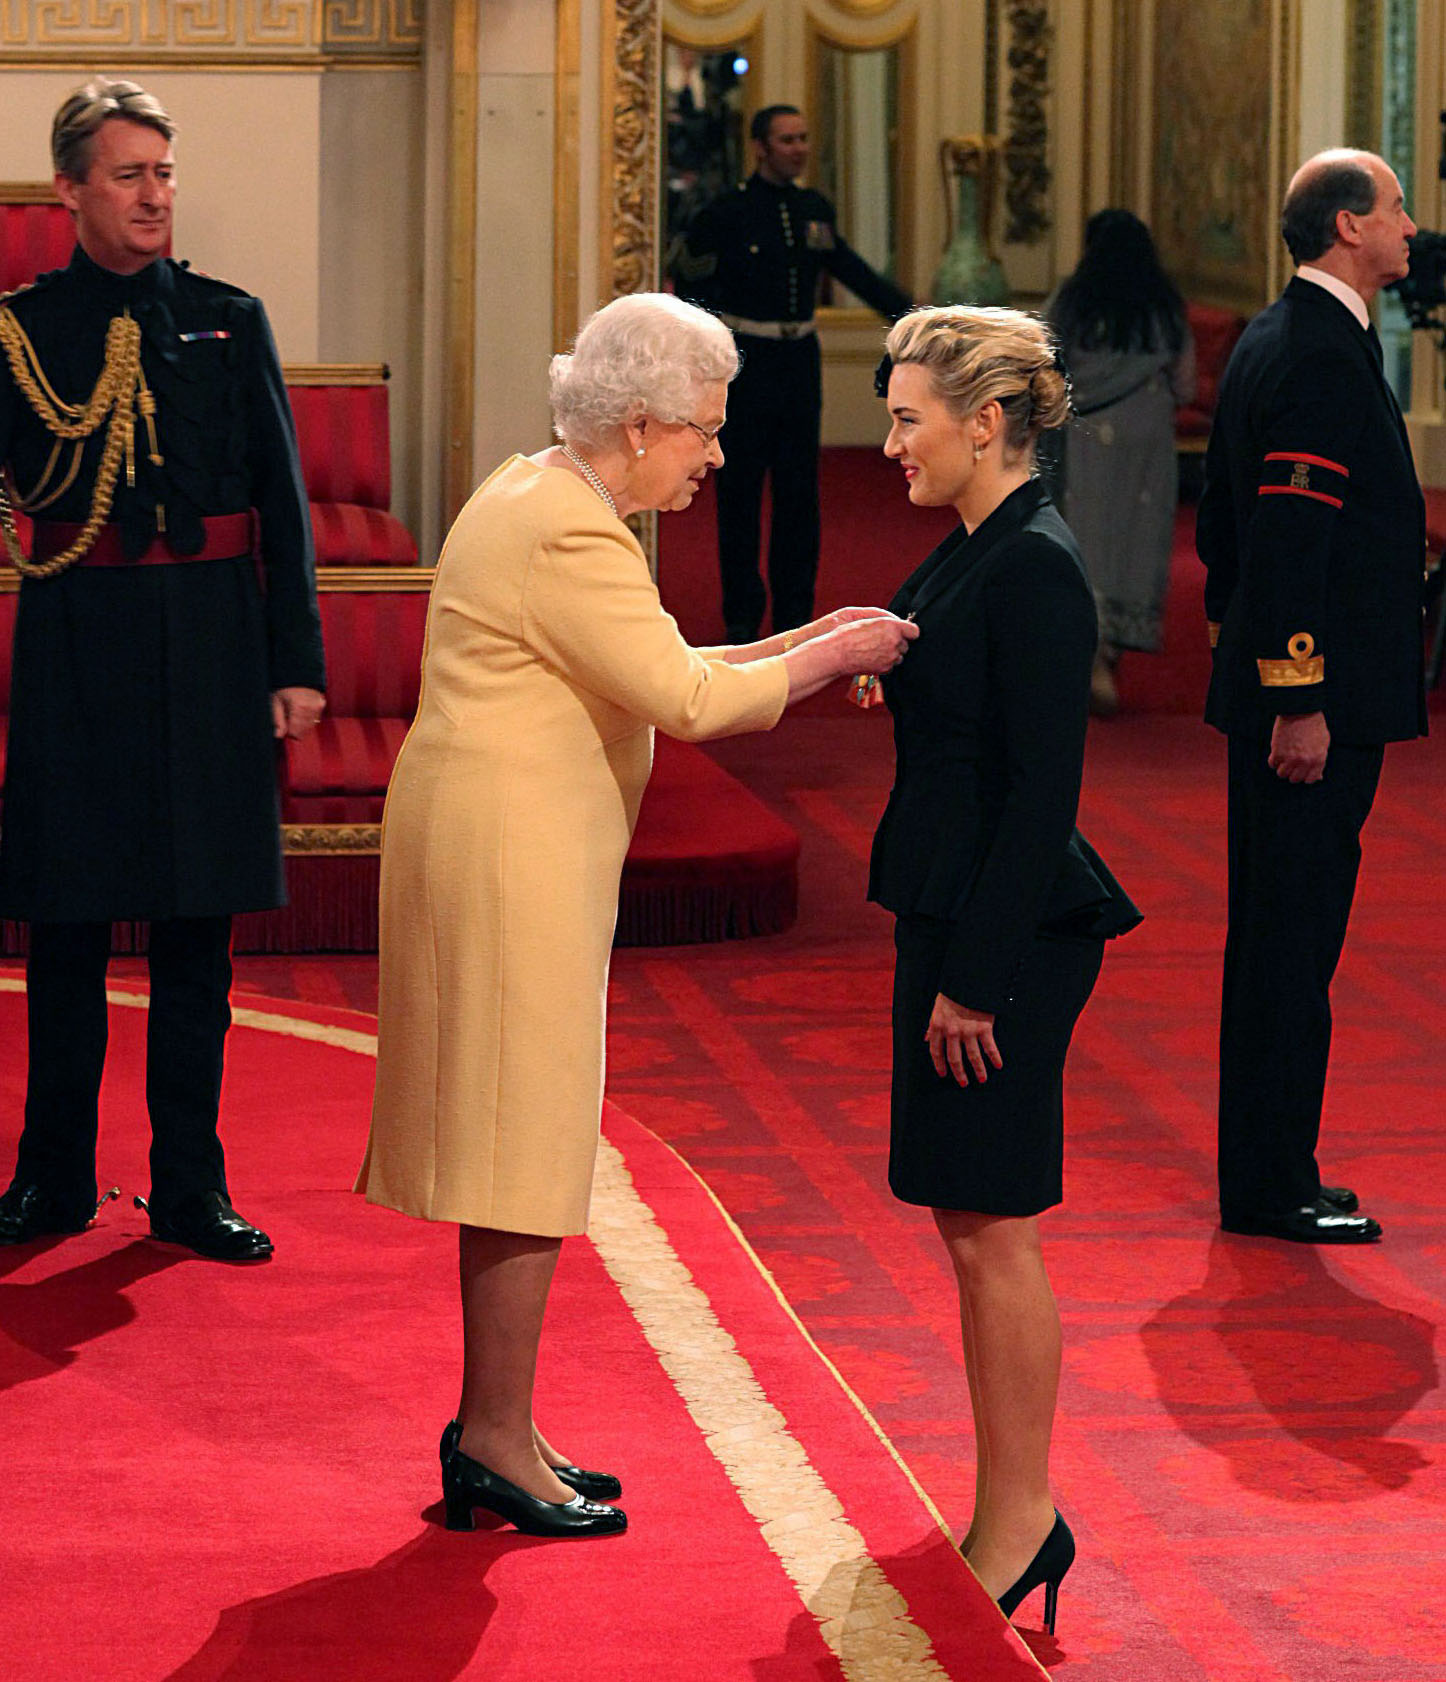 FILE PHOTO: Queen Elizabeth II awards British actress Kate Winslet a CBE (Commander of the Most Excellent Order of the British Empire) for services to drama, during an Investiture ceremony at Buckingham Palace in central London, U.K., Nov. 21, 2012.